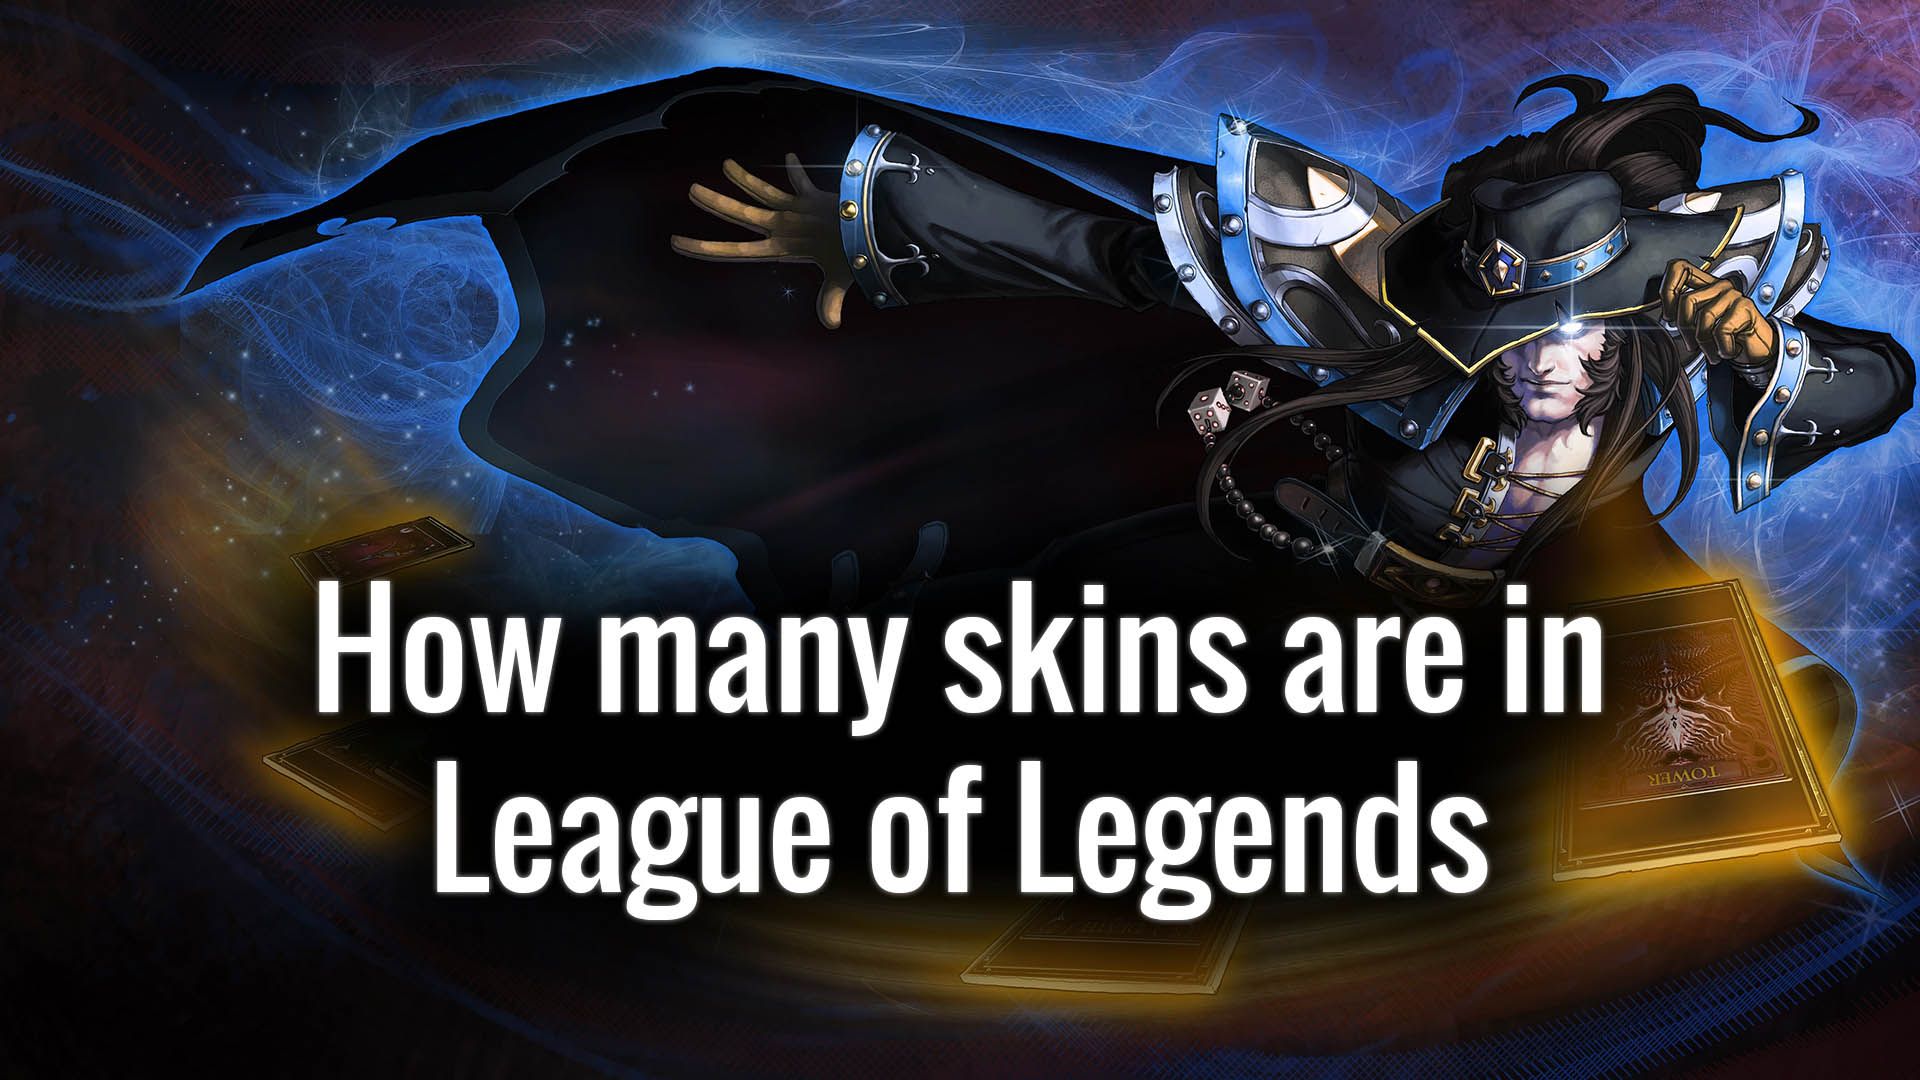 The Number of Skins in League of Legends is High